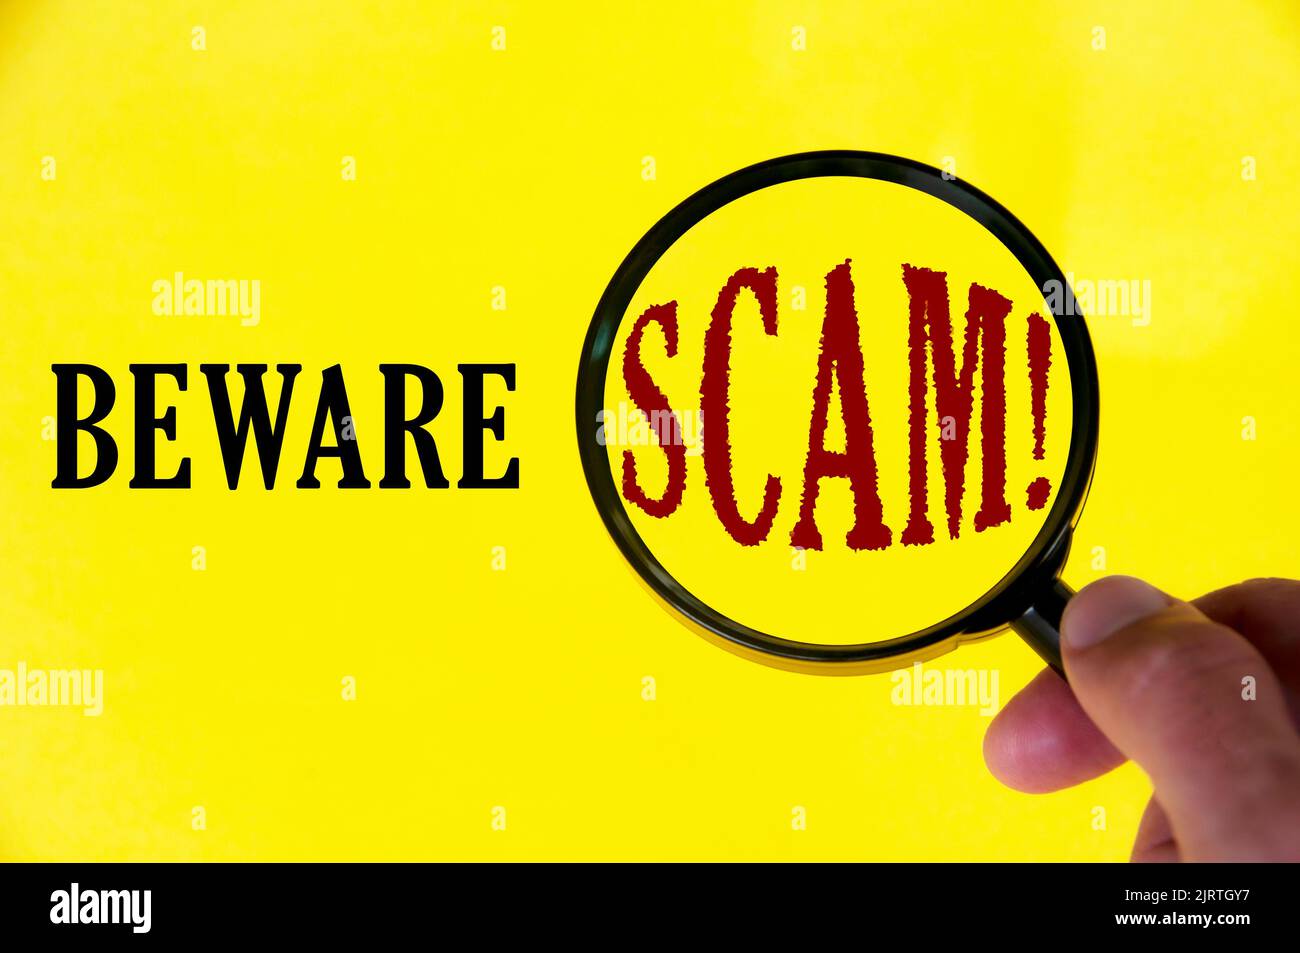 Beware scam text on yellow cover with hand holding magnifying glass. Scamming and fraud concept. Stock Photo